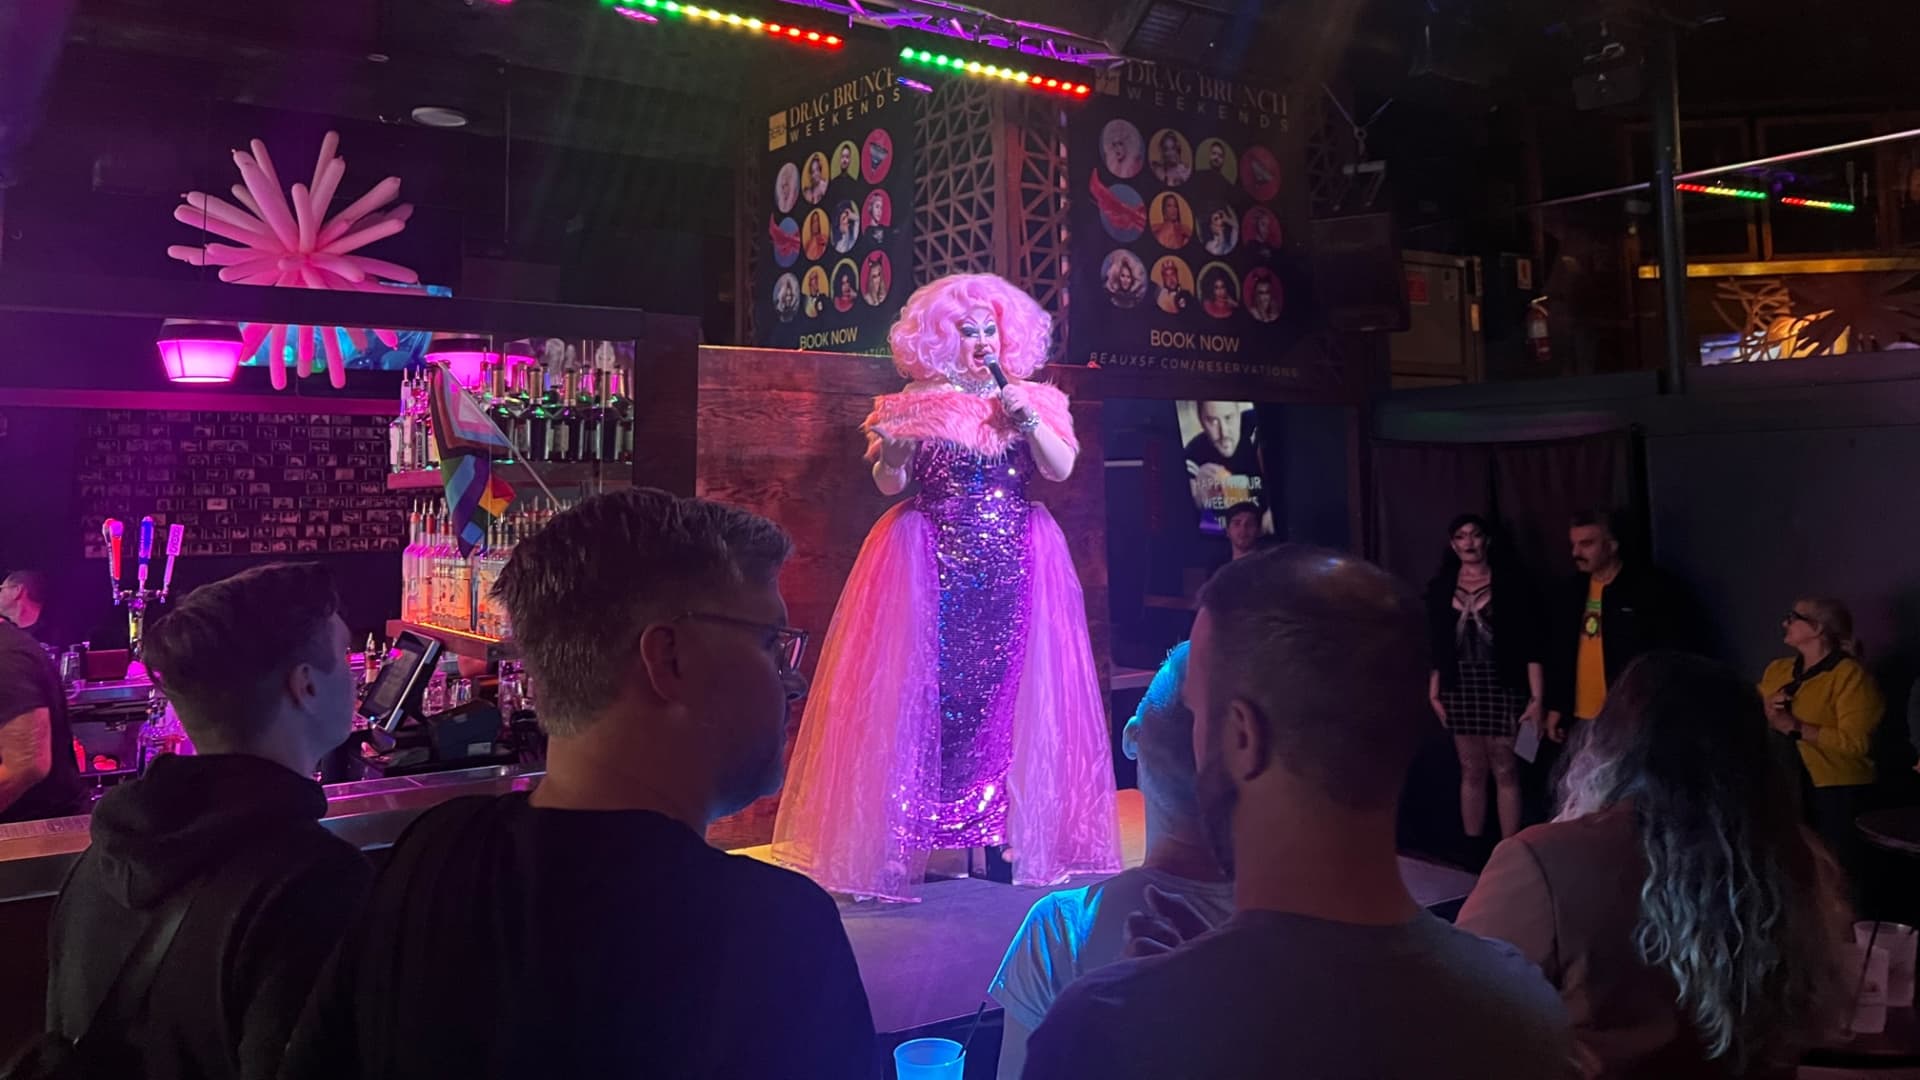 Google employees boo company at drag show that was nearly cancelled amid religious employee protest